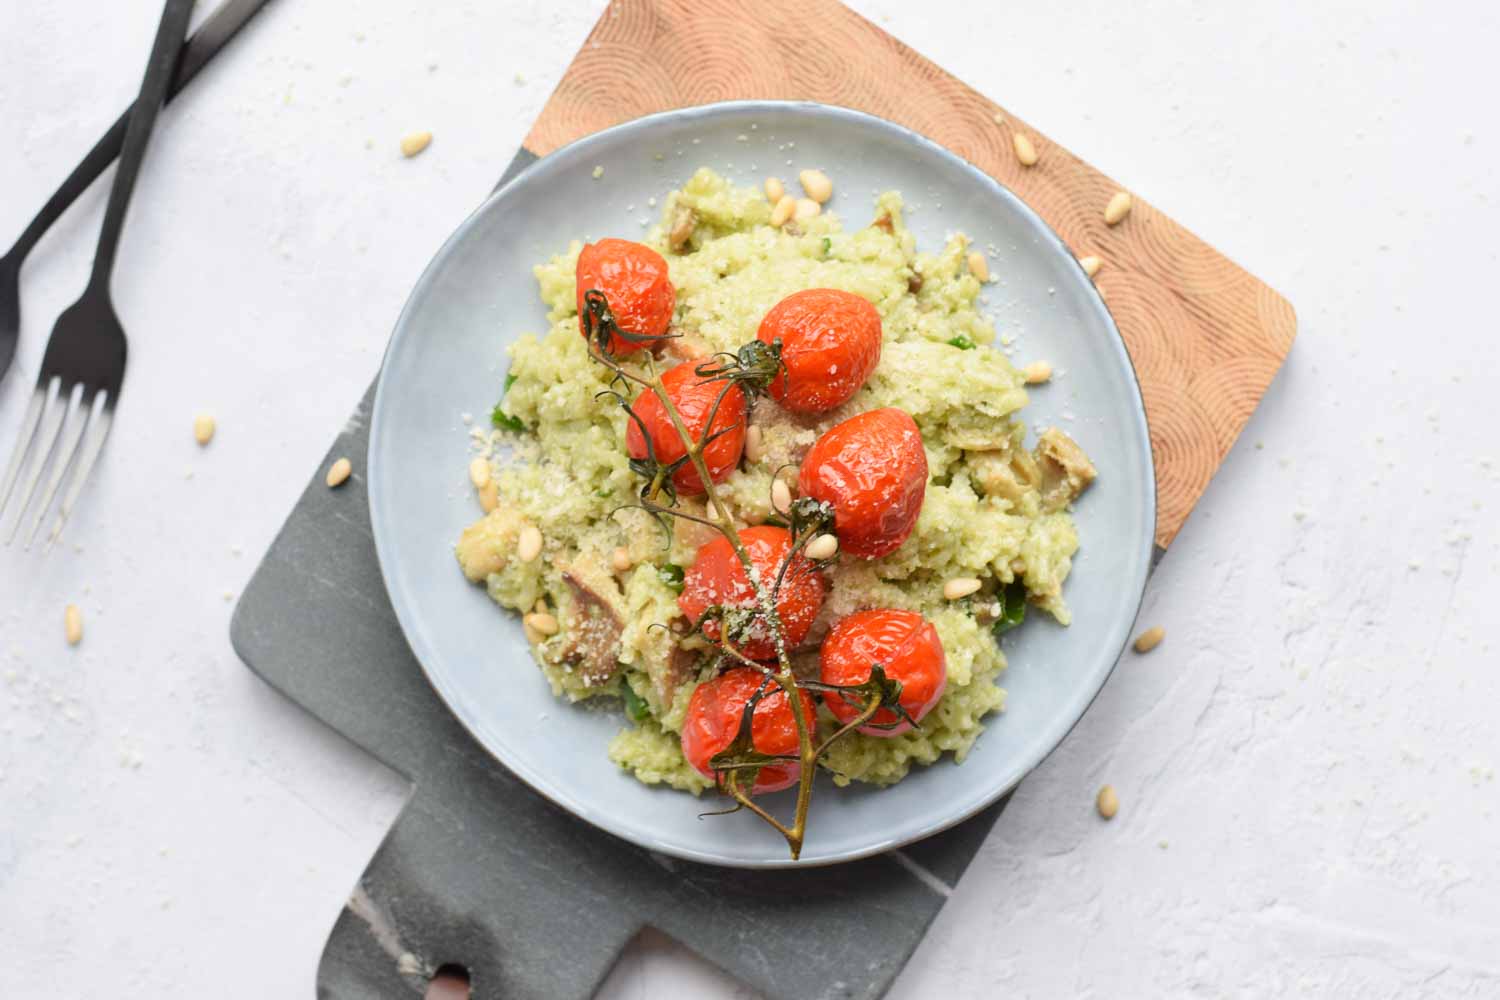 Low FODMAP risotto with green pesto